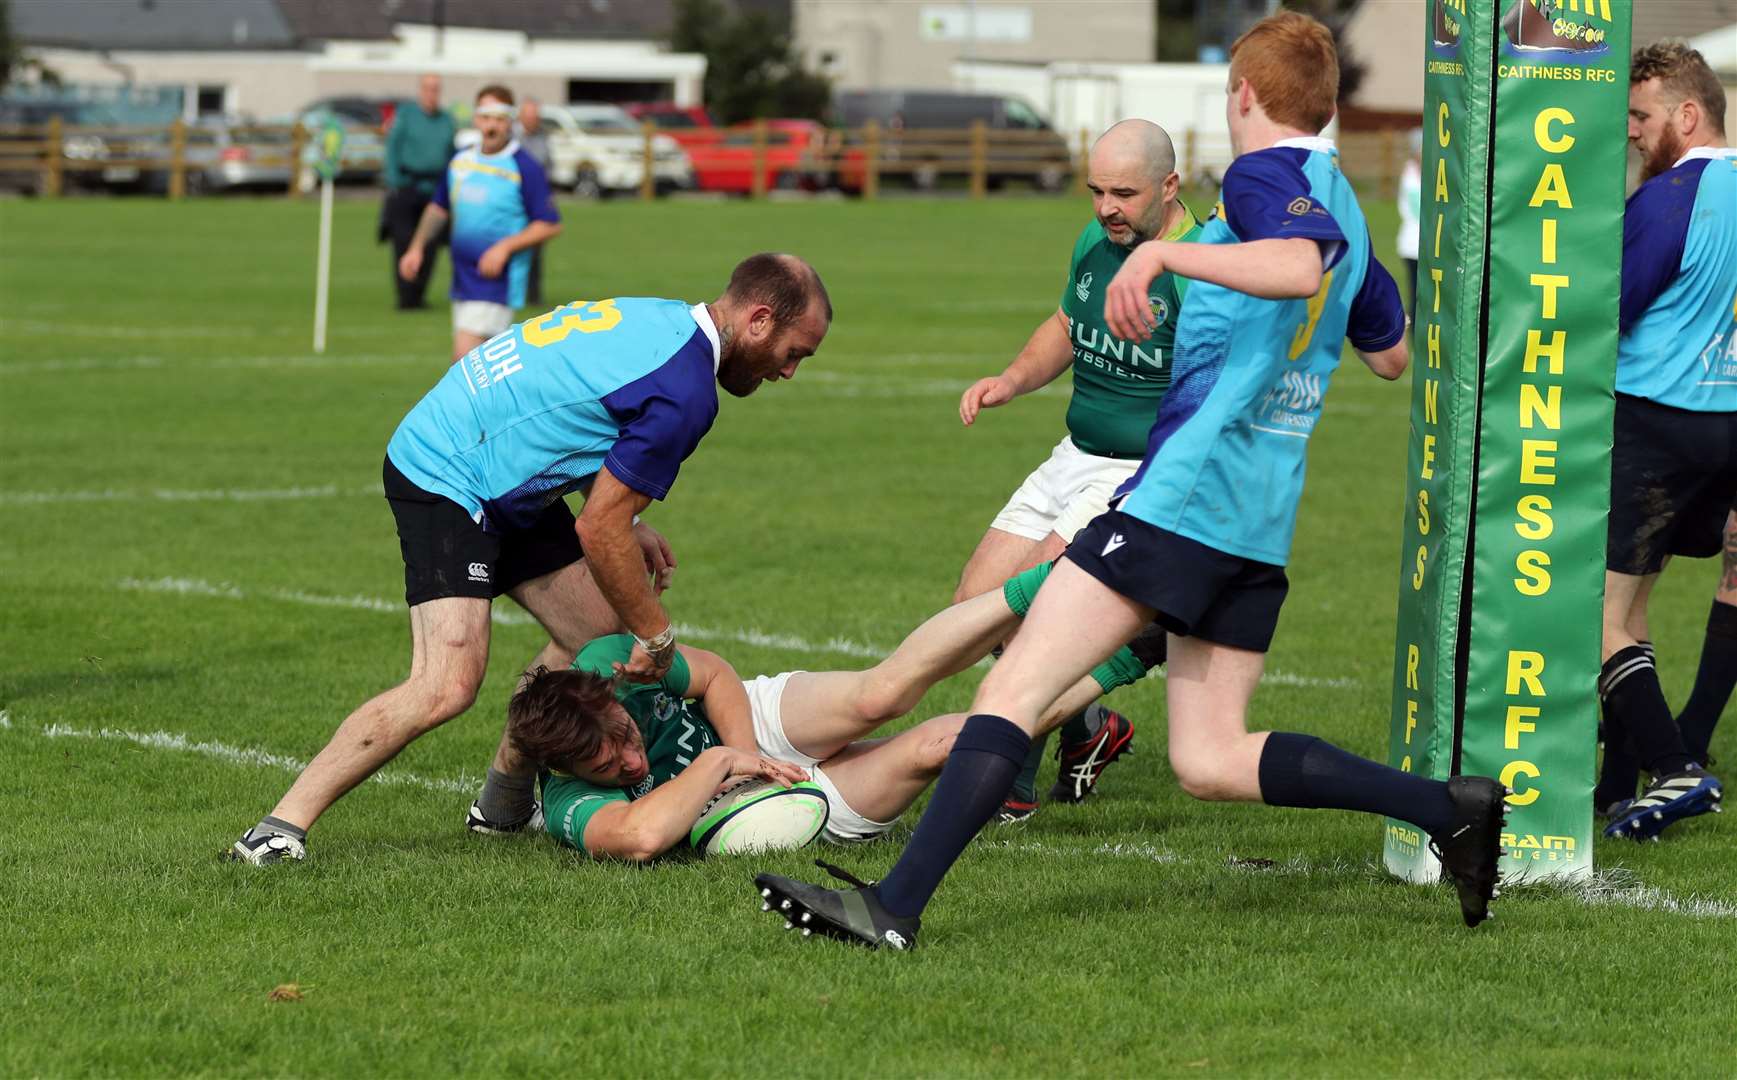 Craig Cannop scores a try for Caithness 2nd XV, helping the team to a 38-27 win. Picture: James Gunn